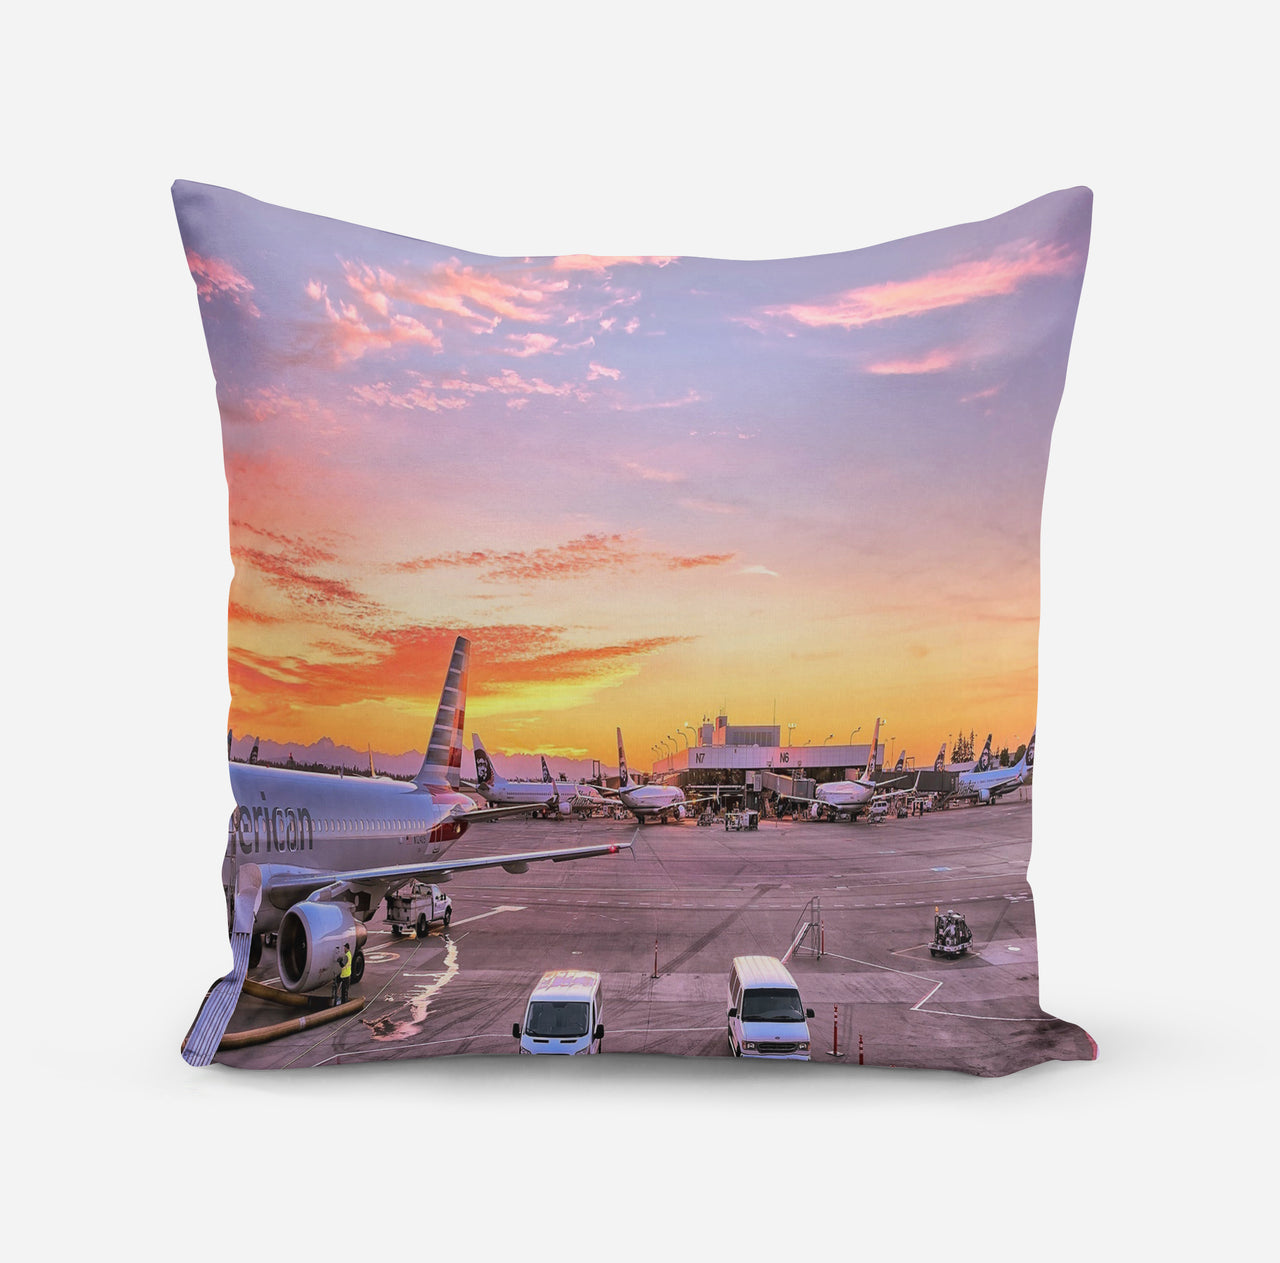 Airport Photo During Sunset Designed Pillows